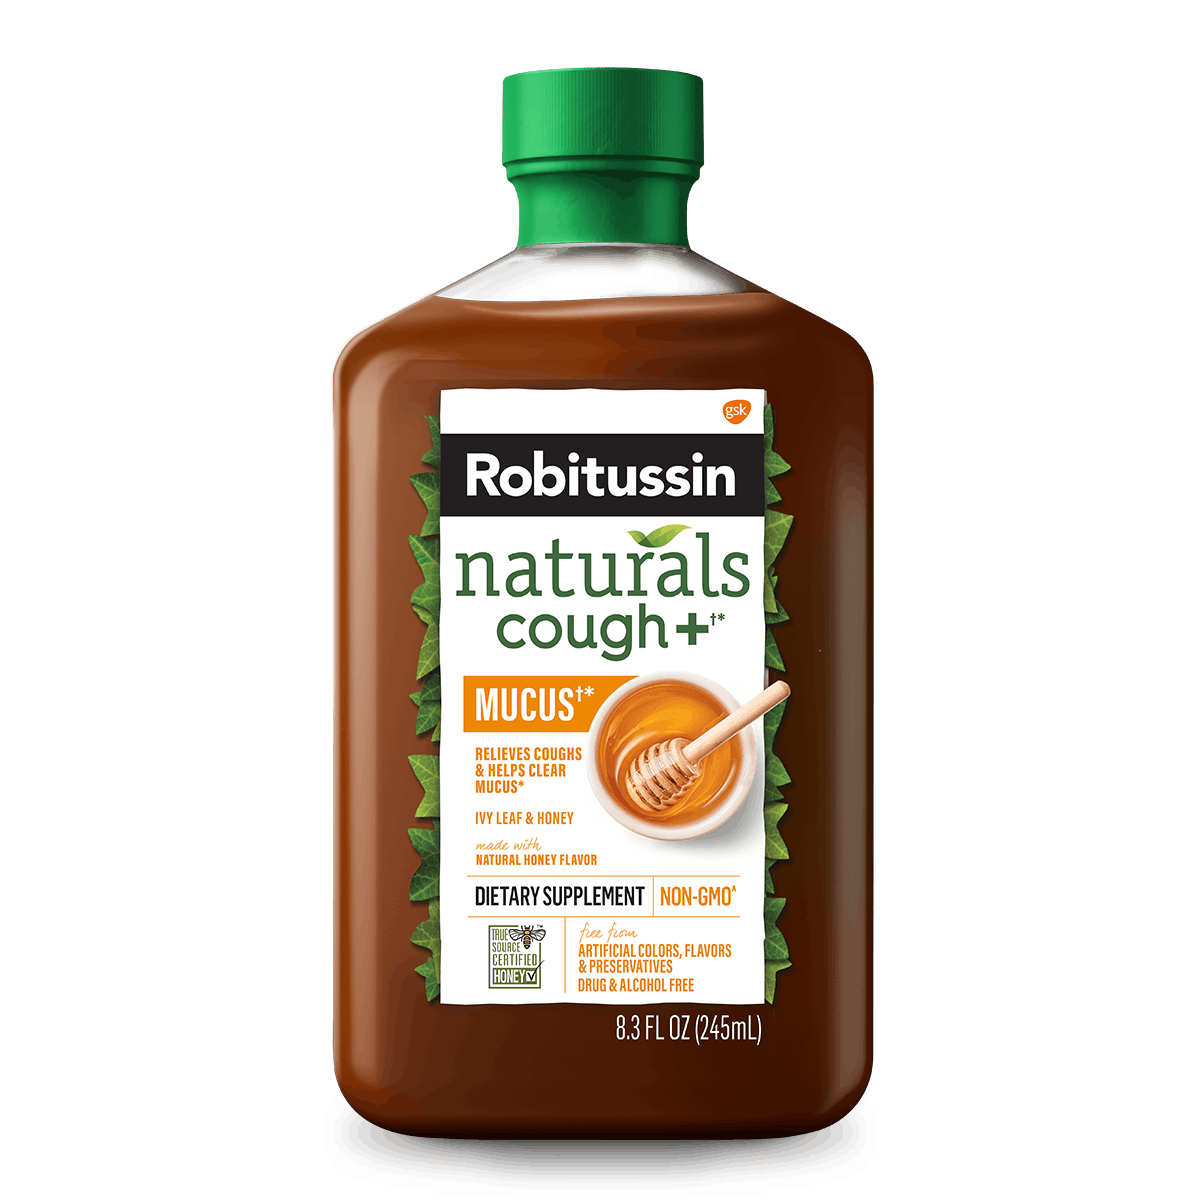 Robitussin Naturals Cough+ Mucus Dietary Supplement